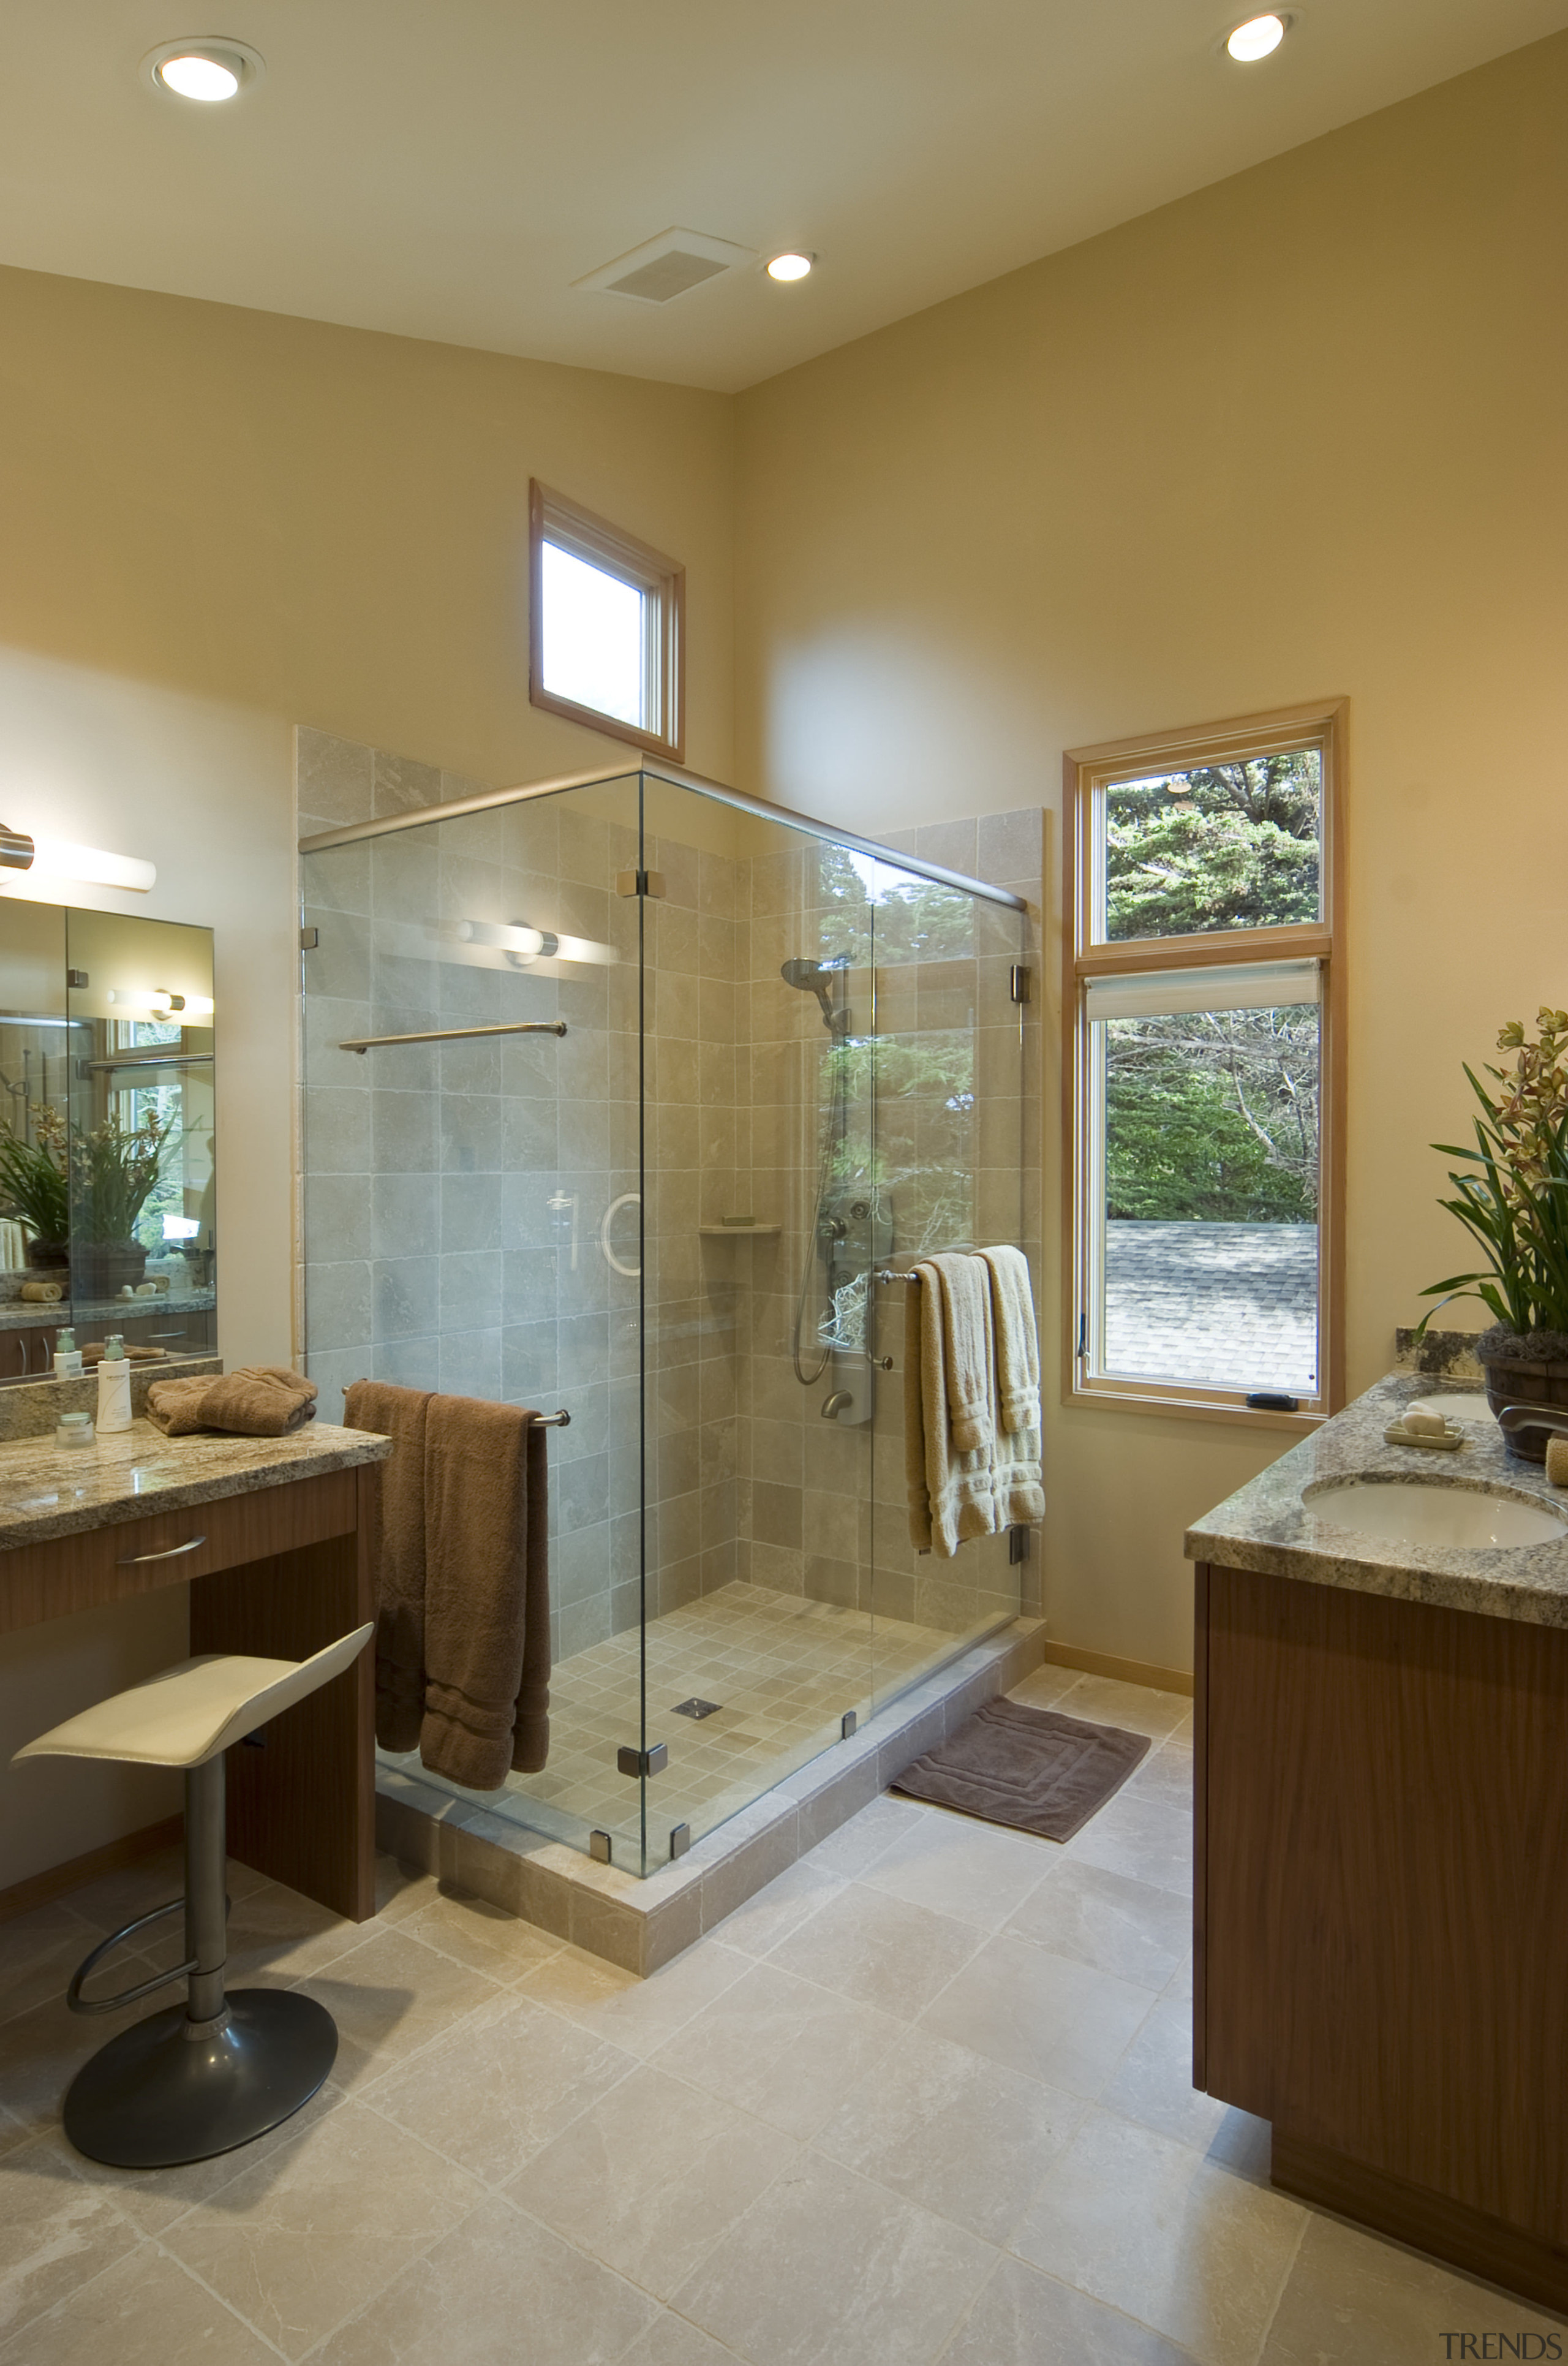 A large double shower is a feature of bathroom, floor, home, interior design, room, brown, gray